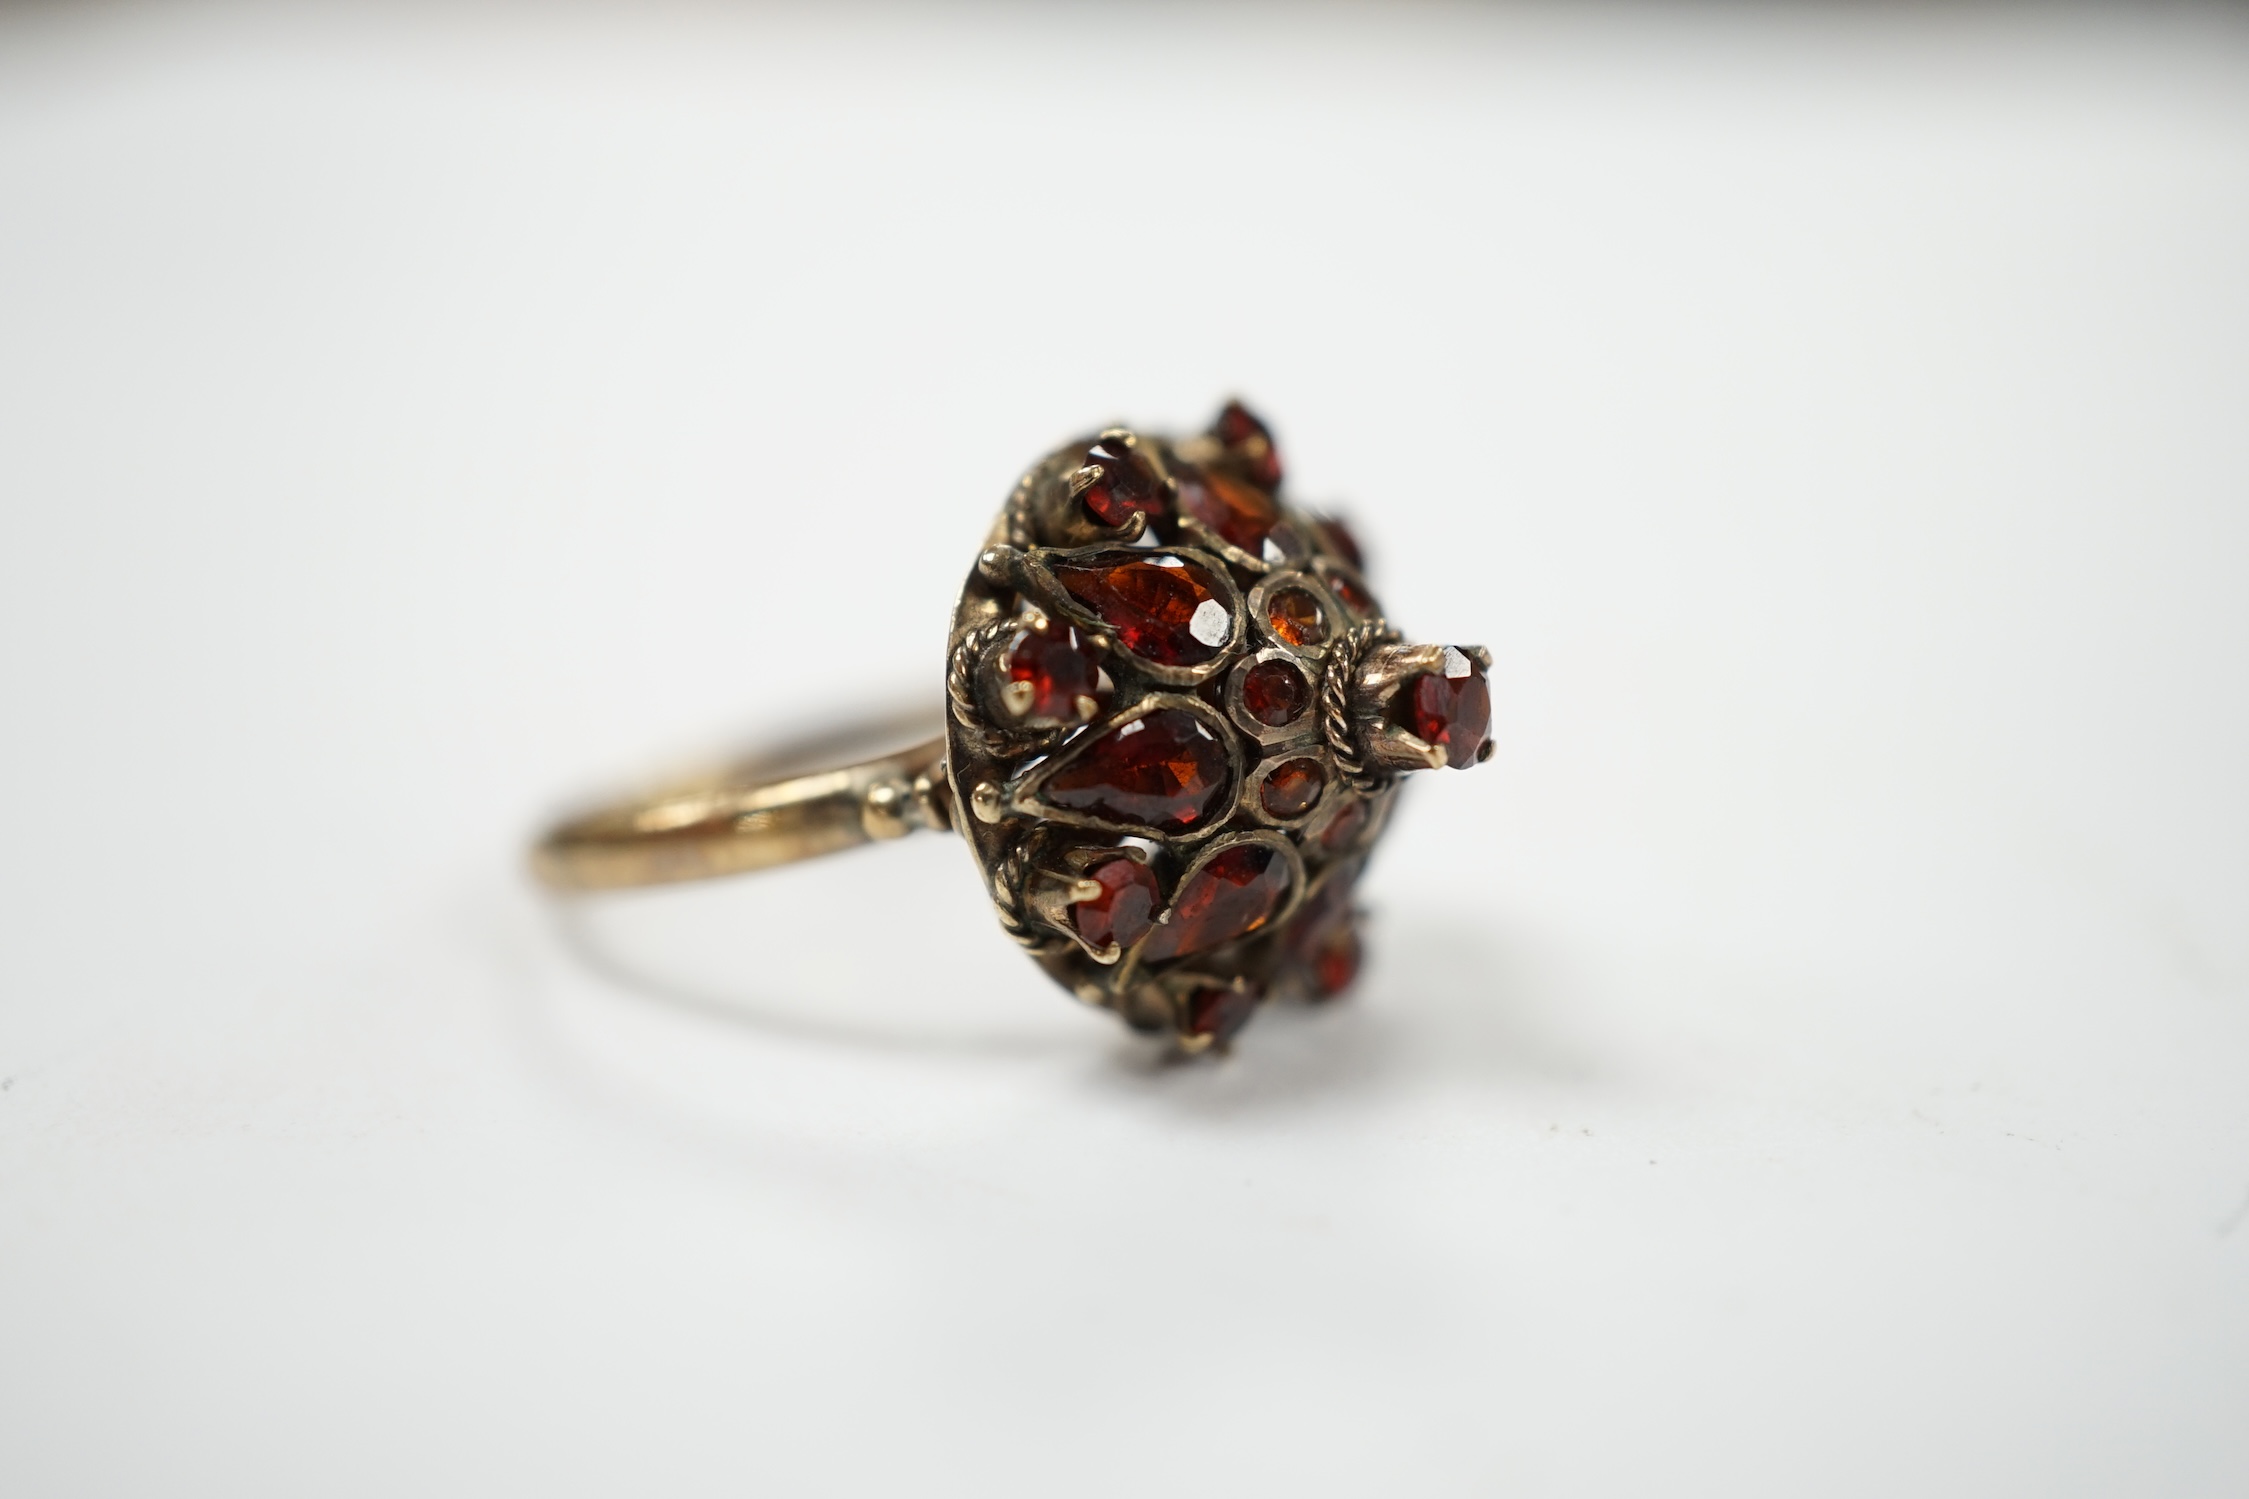 A 14k and garnet cluster set domed dress ring, size M/N, gross weight 3.4 grams. Condition - fair